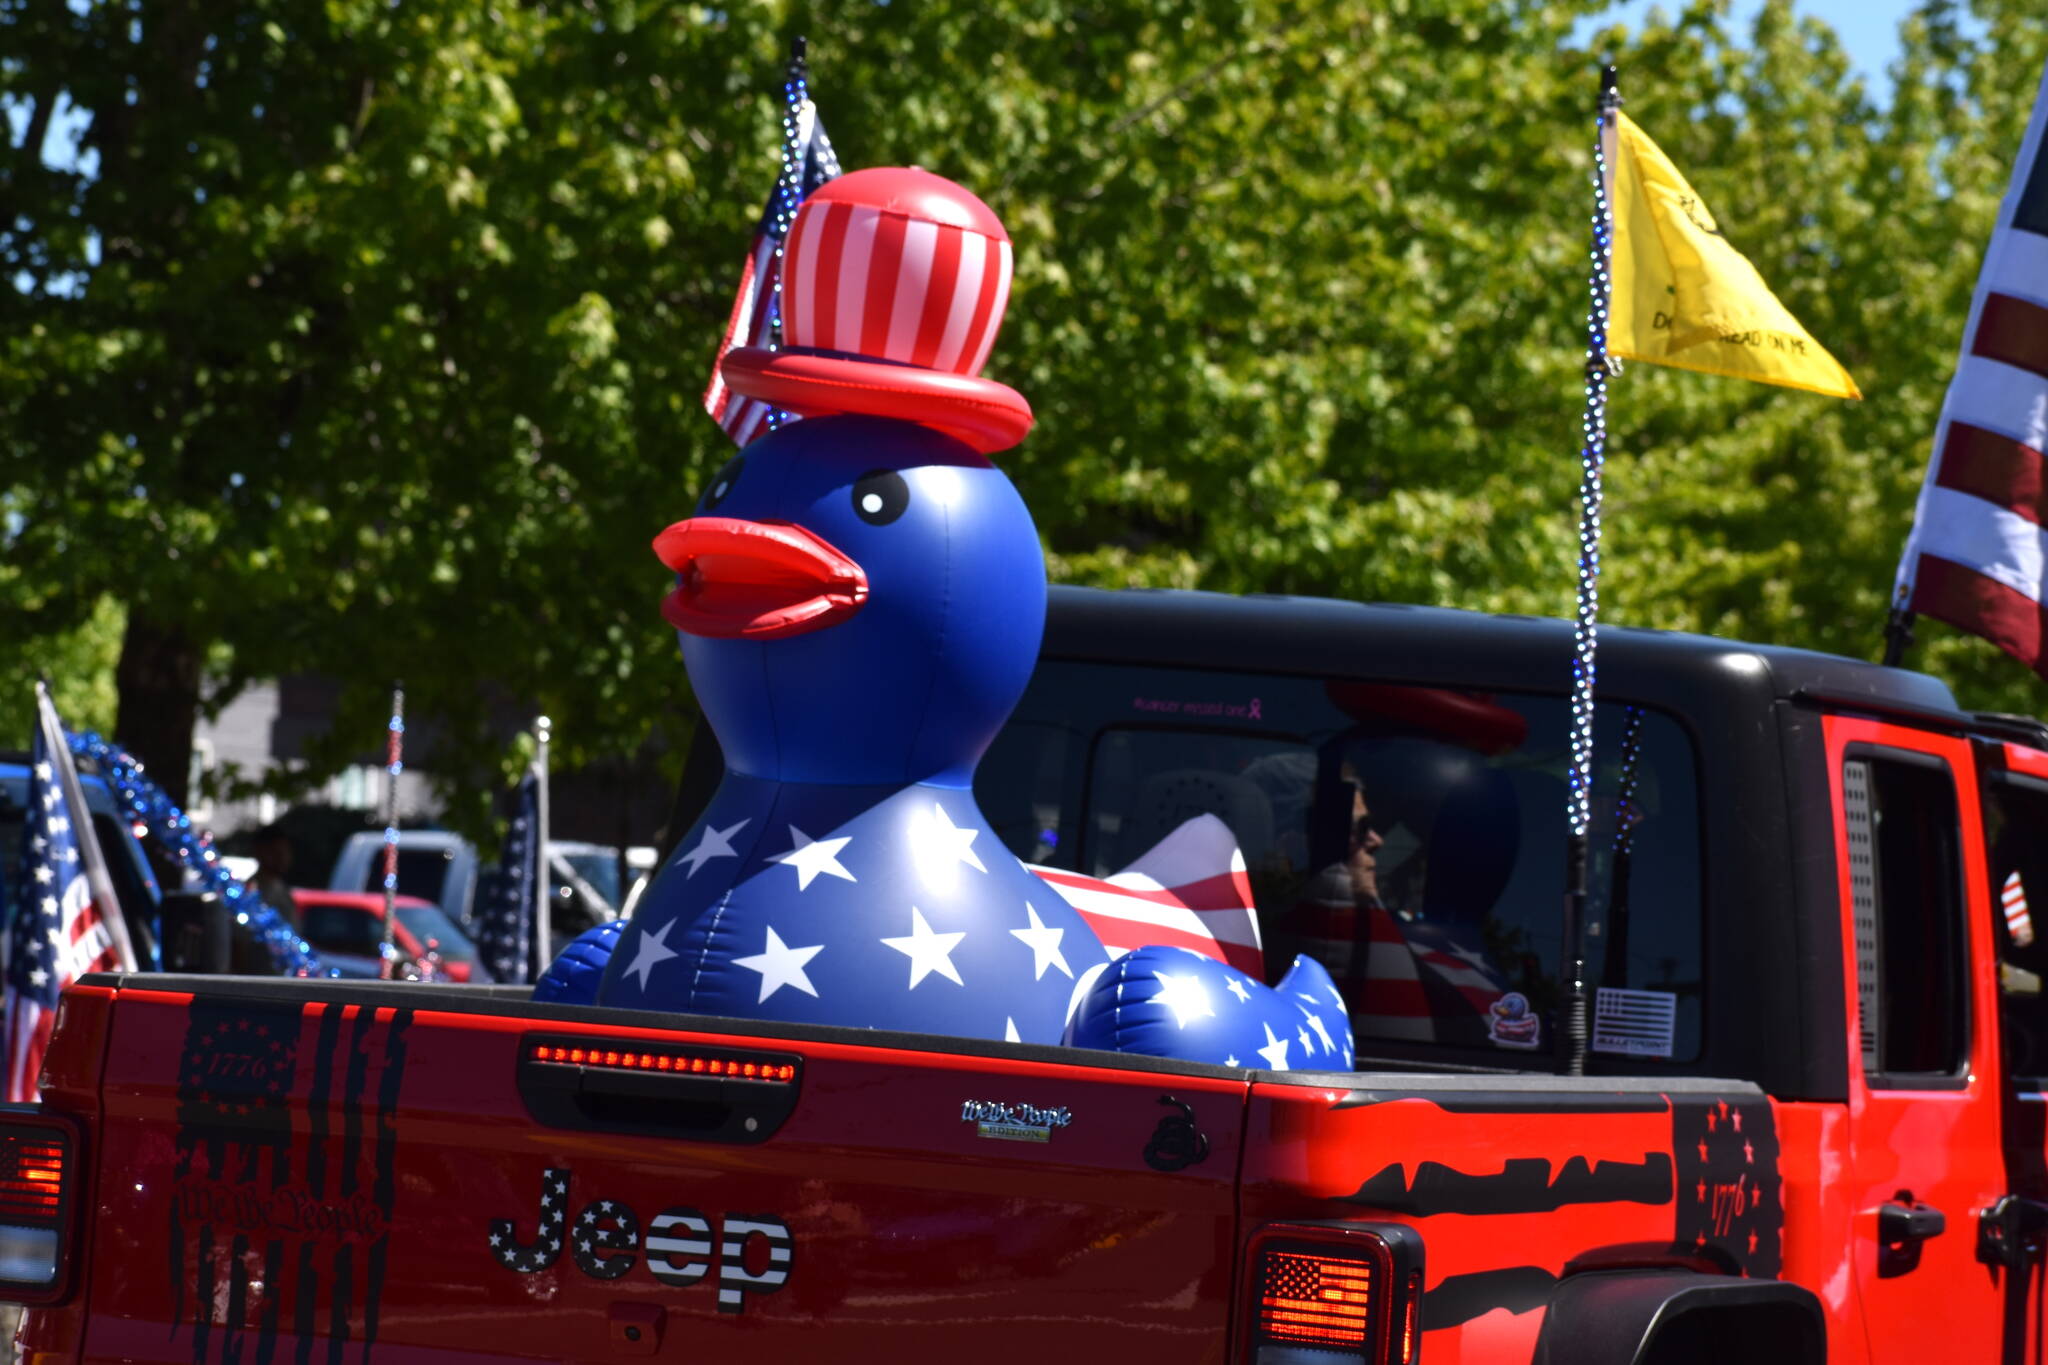 Matthew N. Wells / The Daily World
The Jeeps were a favorite again at Aberdeen Founders Day. This especially festive duck, covered in star-spangled goodness, was quite the sight during the parade.